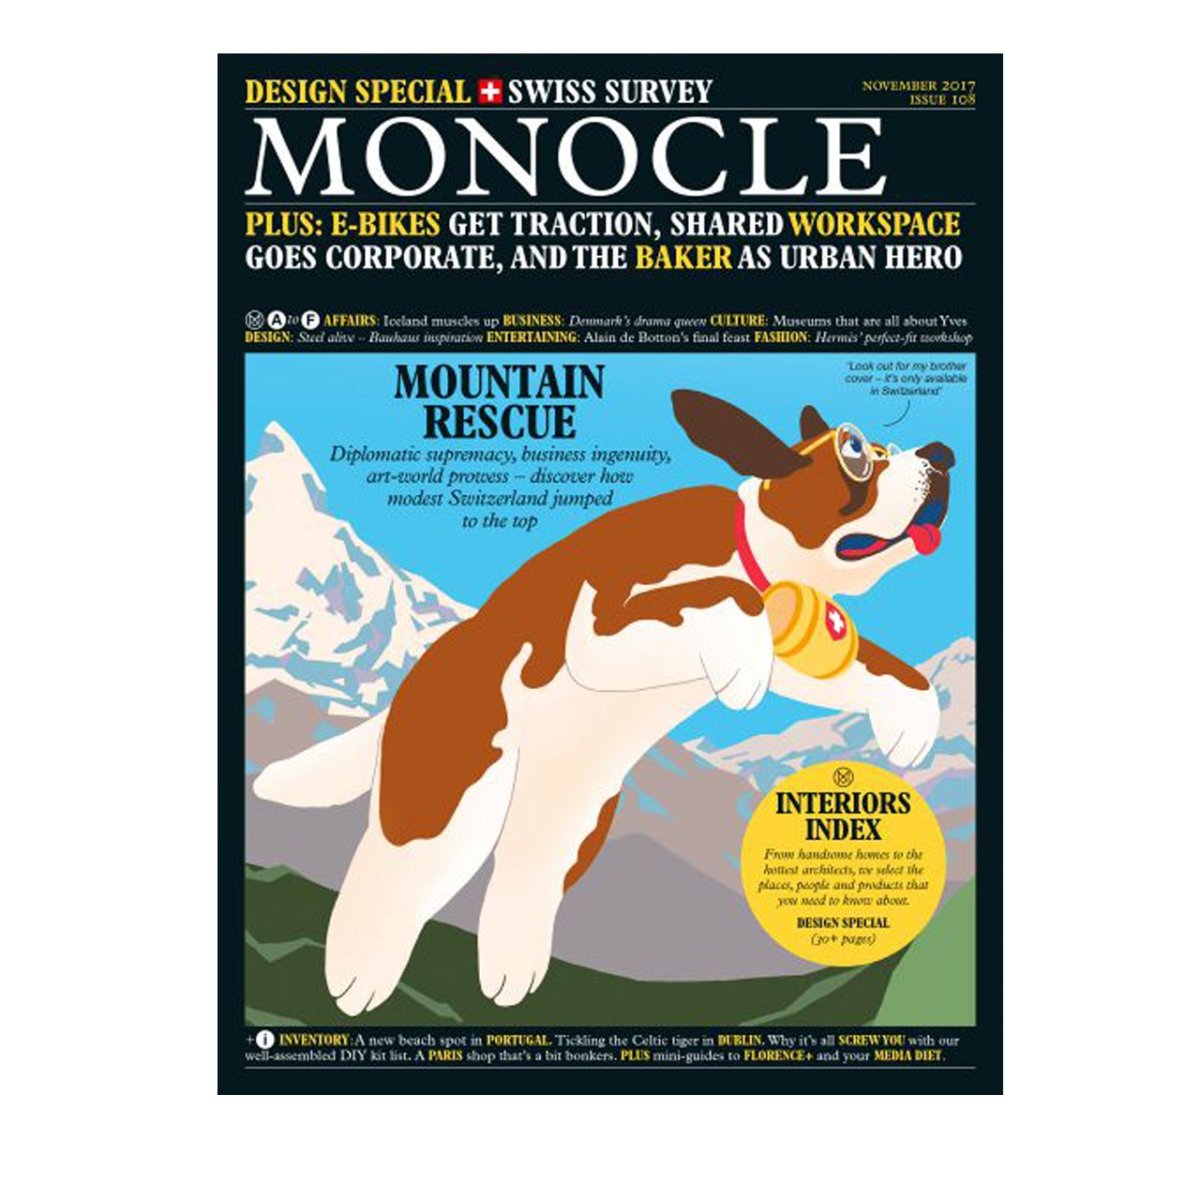 Image of MONOCLE Issue 108: Design Special Swiss Survey